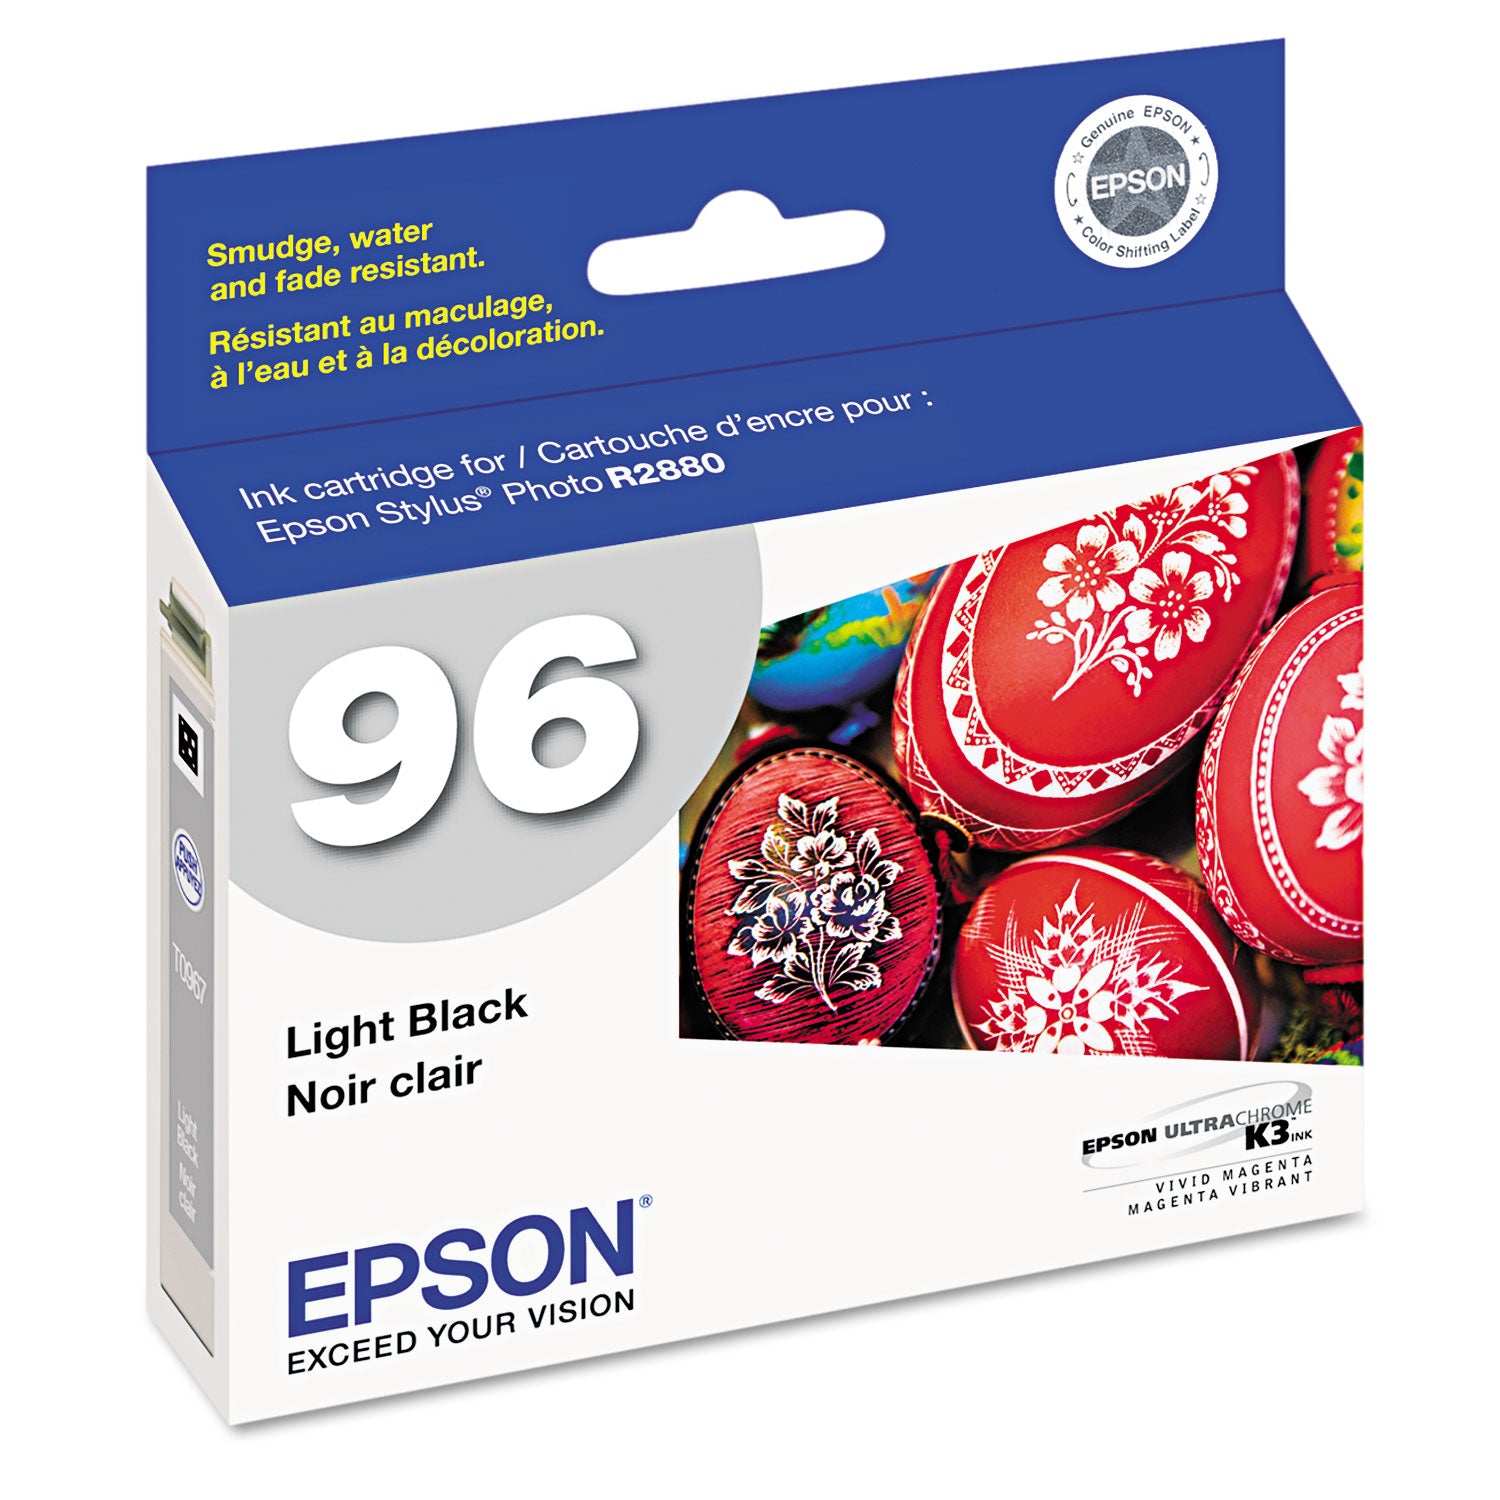 t096720-96-ink-450-page-yield-light-black_epst096720 - 1